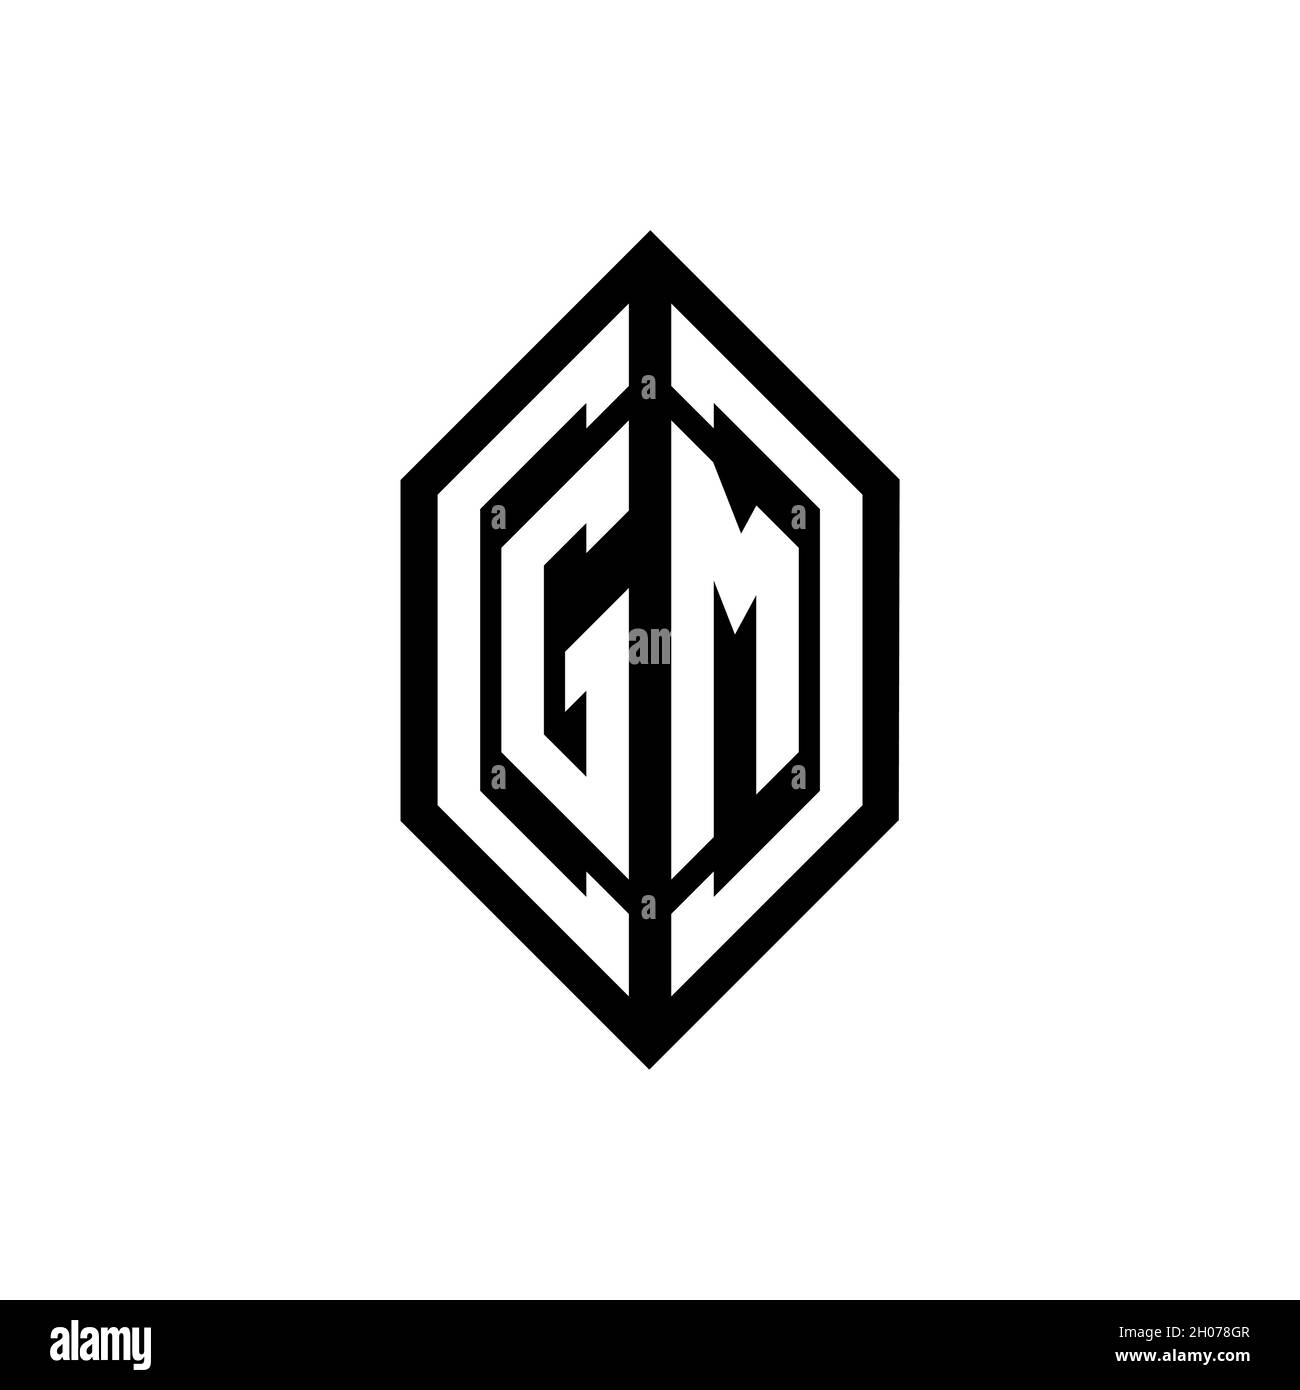 Gm monogram logo with abstract shapes in modern Vector Image